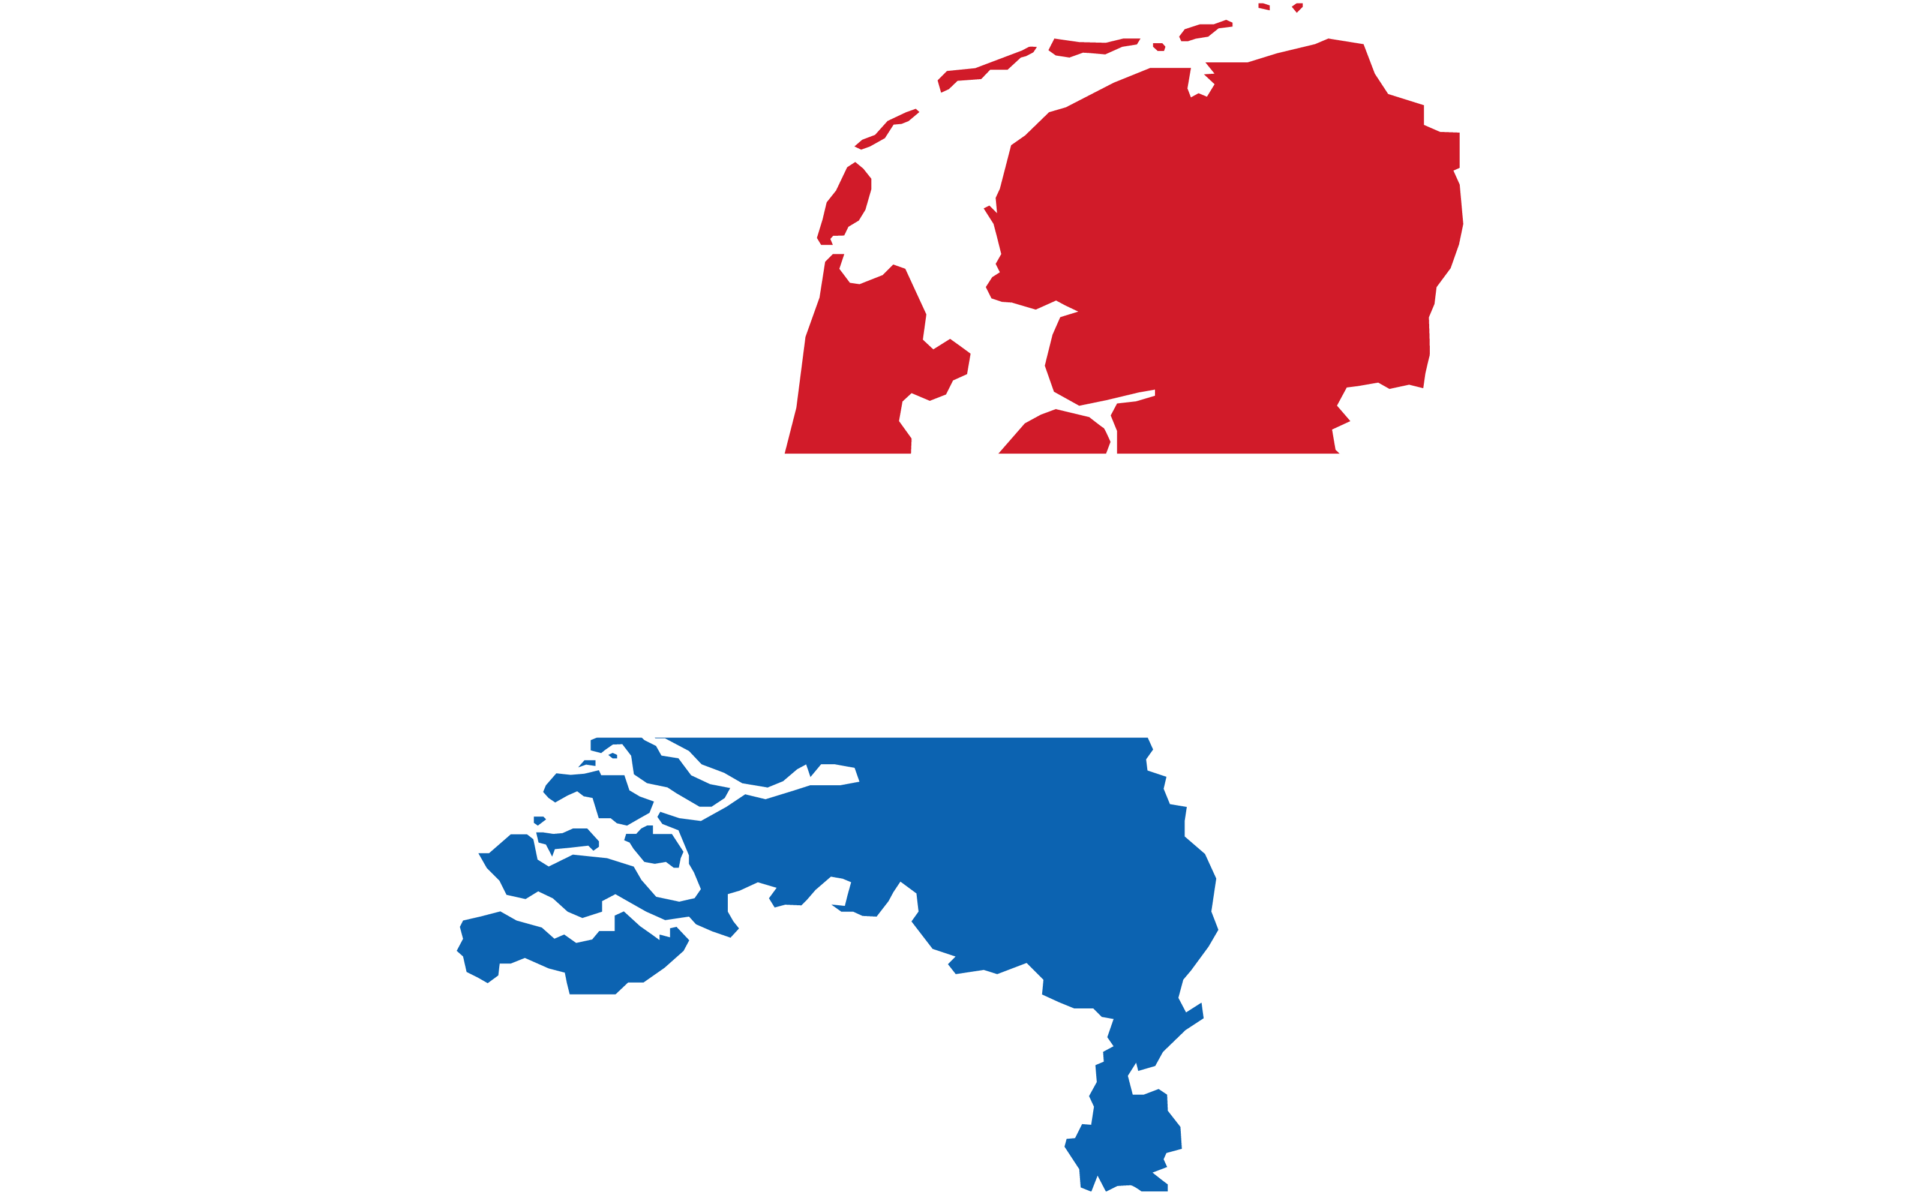 Health in the Netherlands